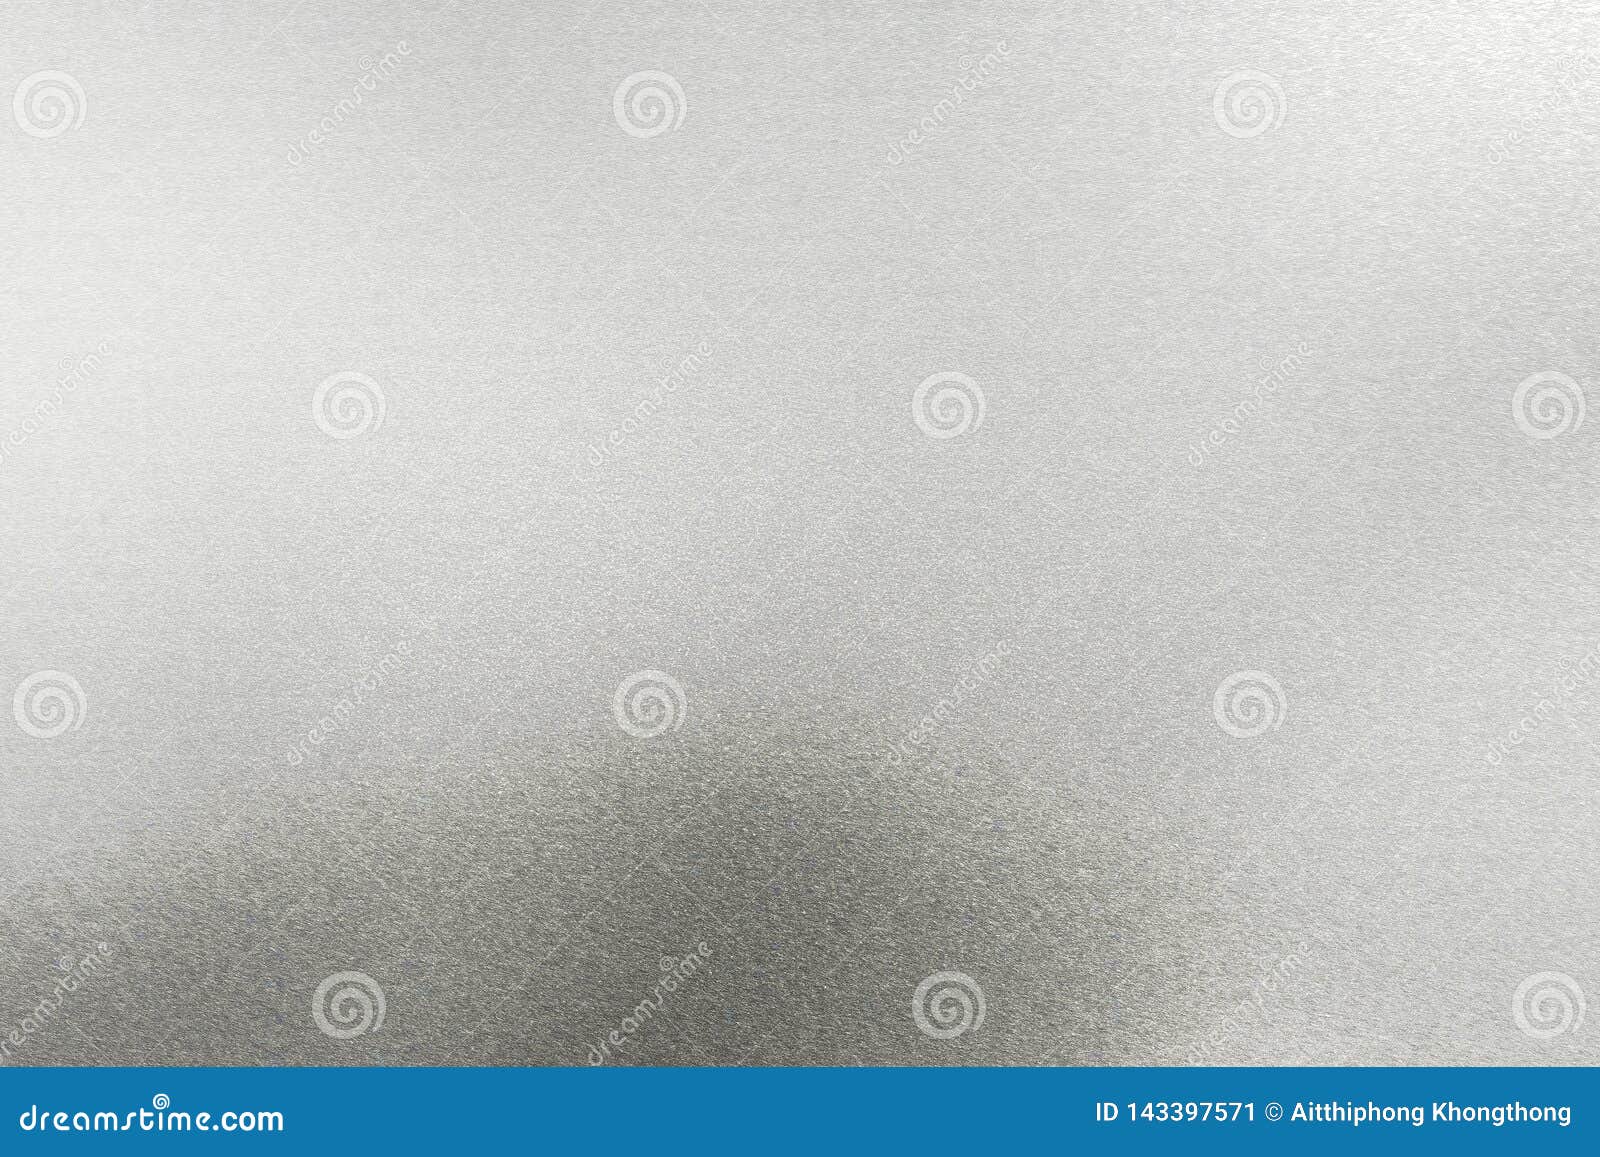 Abstract Texture Background, Dirty Silver Metal Wall Stock Image ...